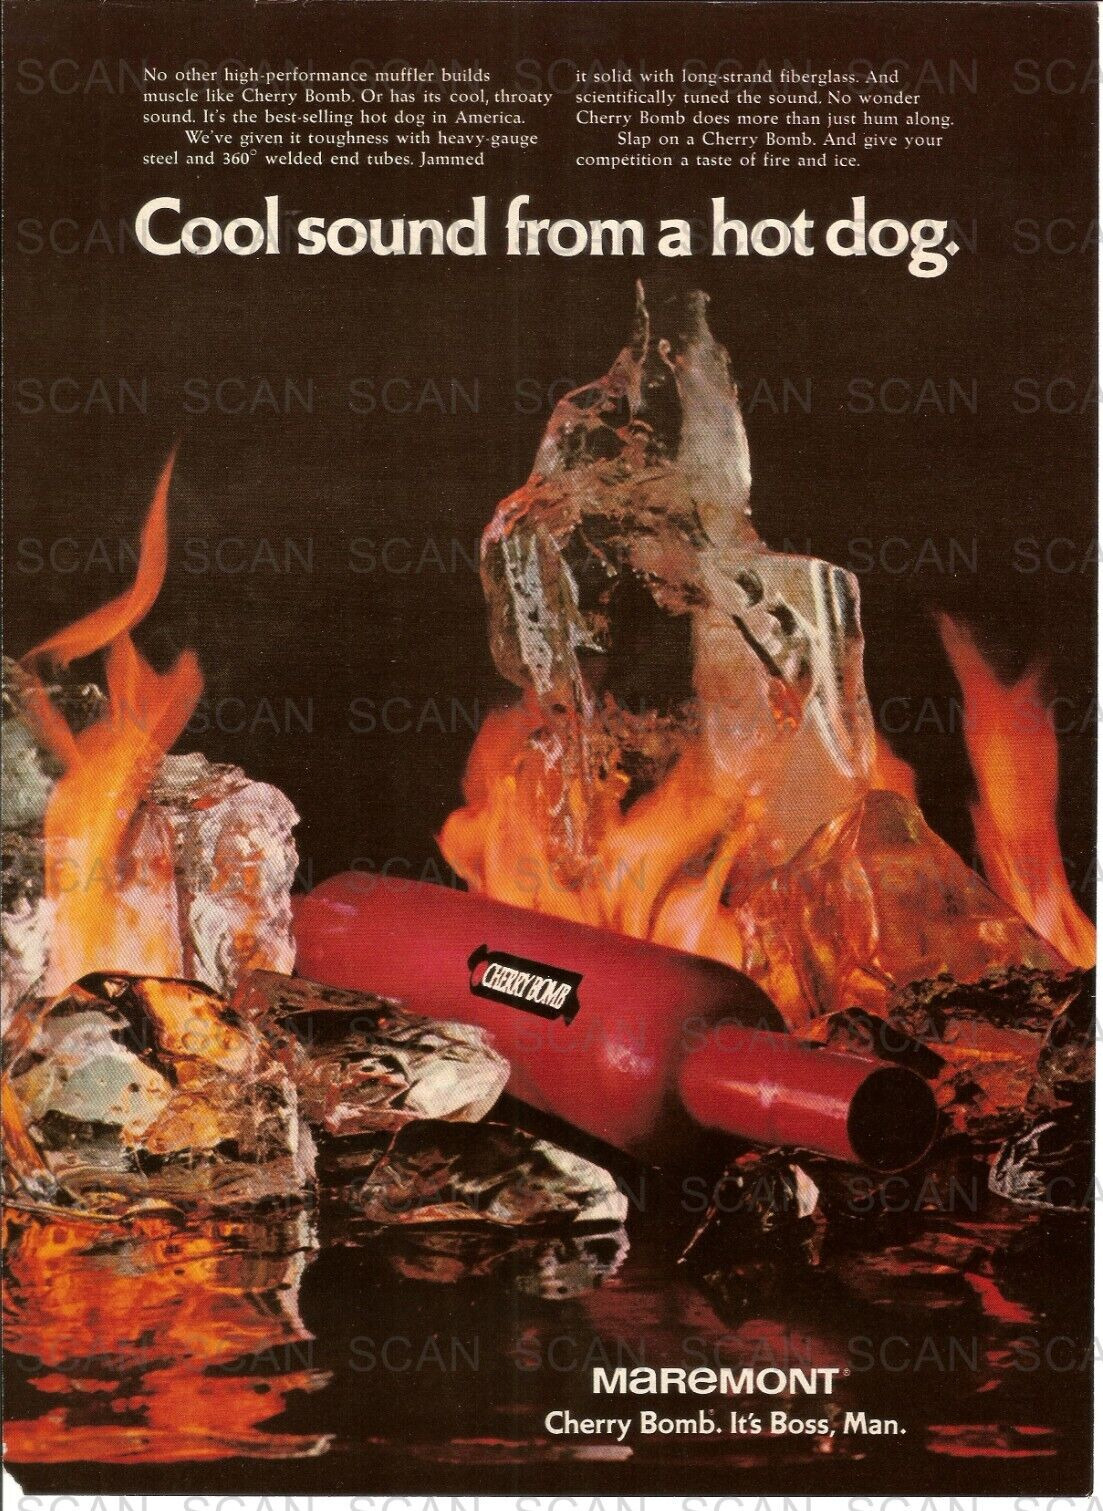 1971 Maremont Cherry Bomb Muffler Vintage Magazine Ad  Cool Sound From a Hot Dog